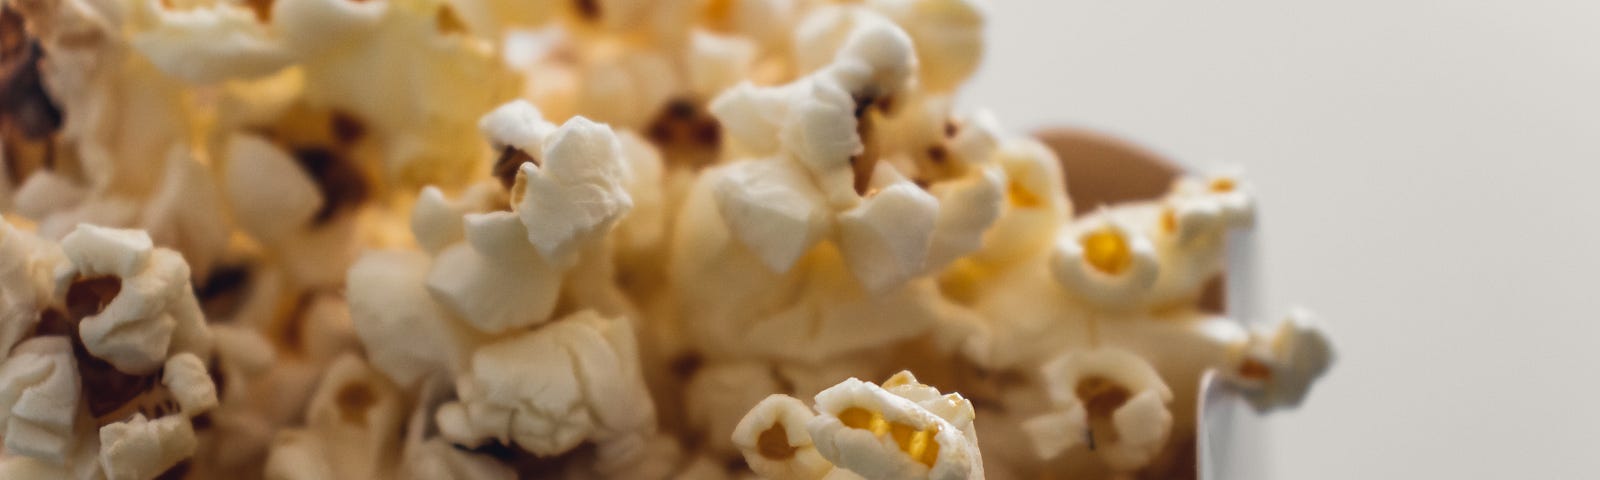 Popcorn in a popcorn box. It looks nom, and I would very much like some popcorn please (lol)